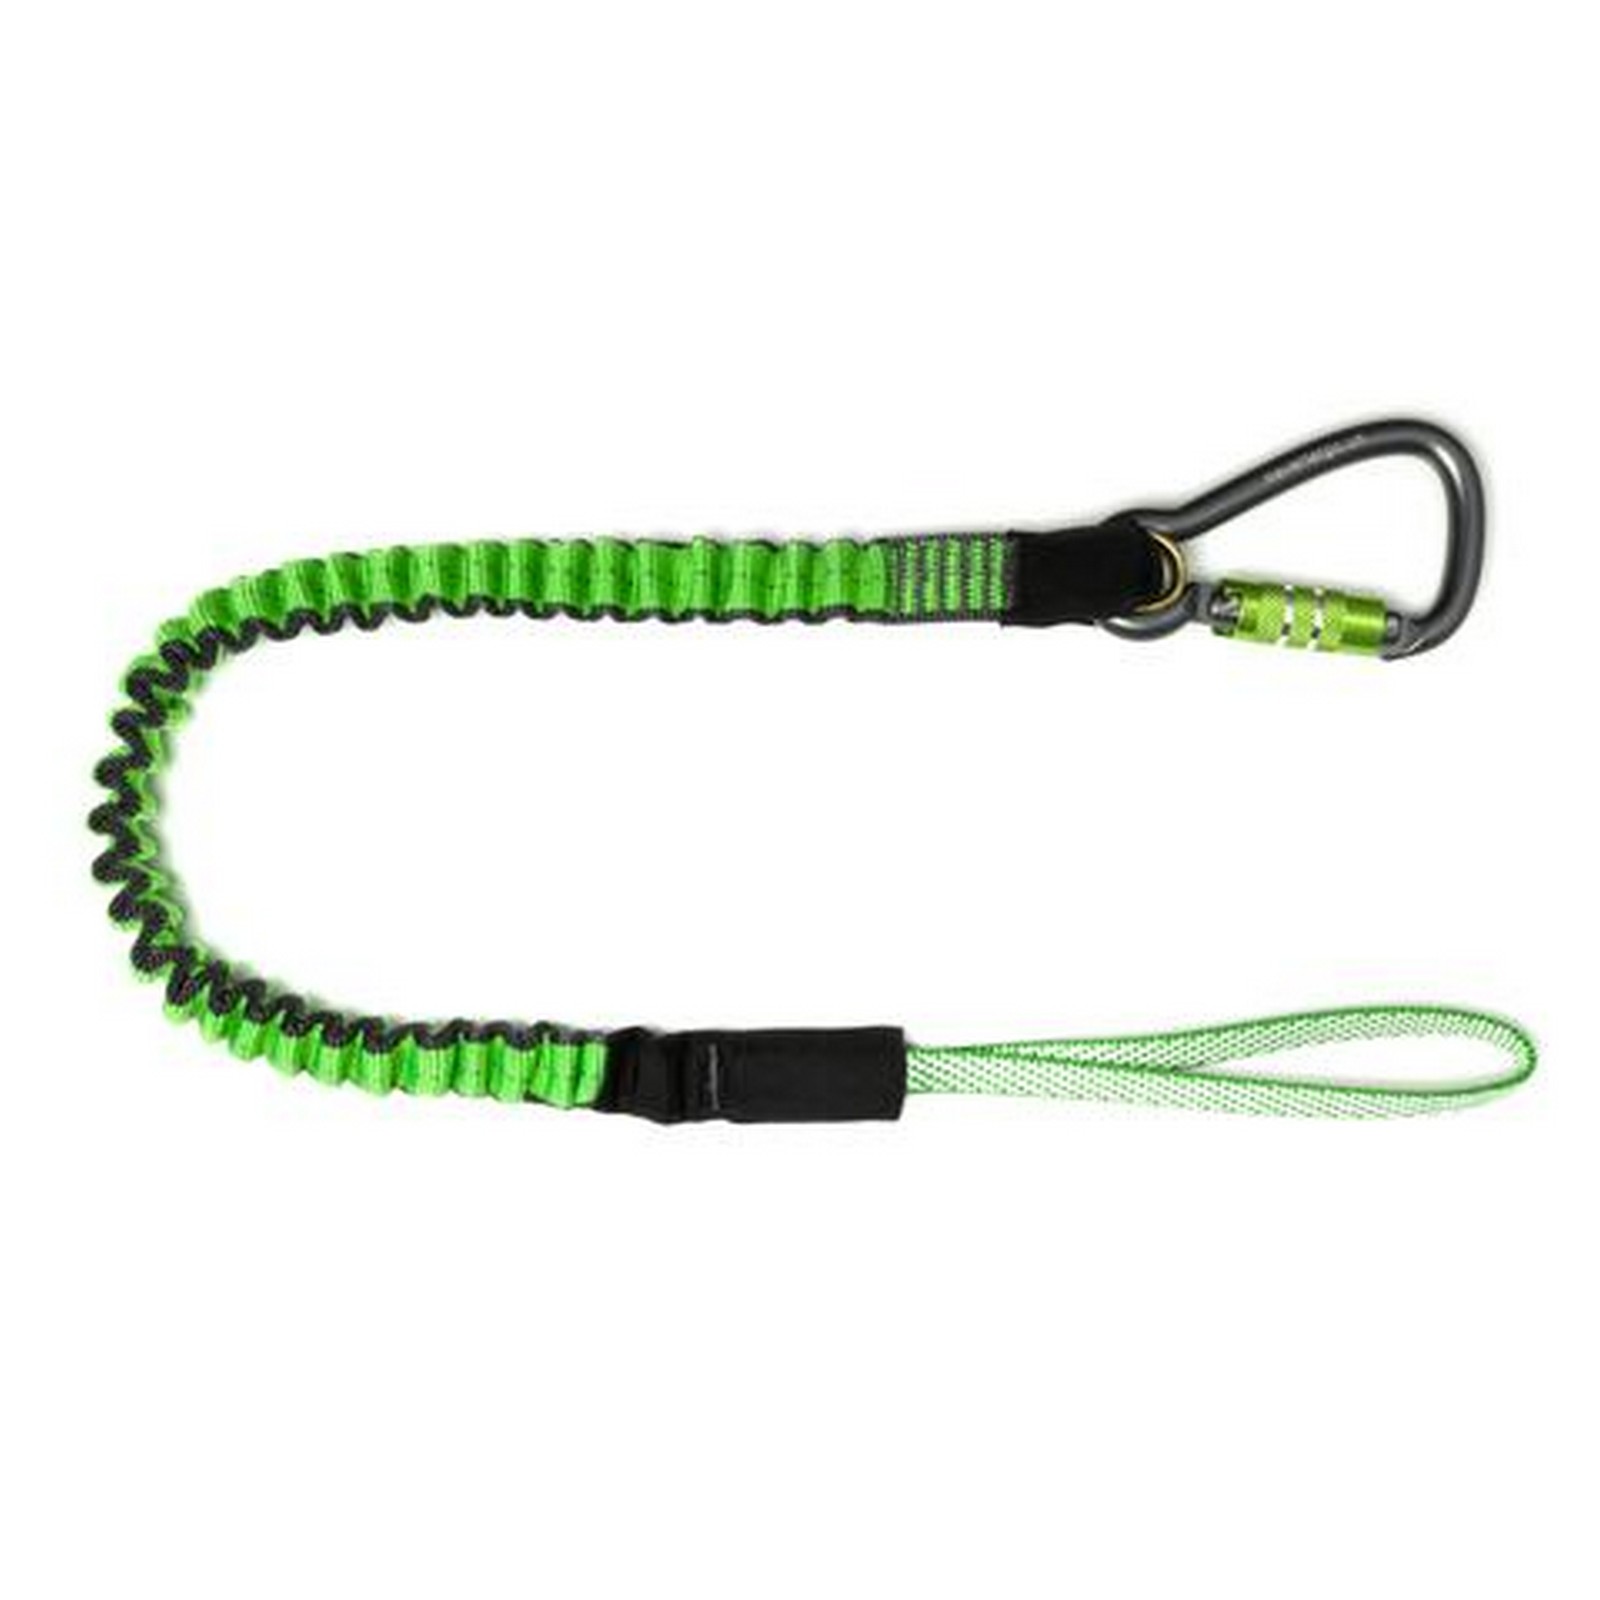 tool lanyards for hand tools tool lanyard bungee 4x Extended